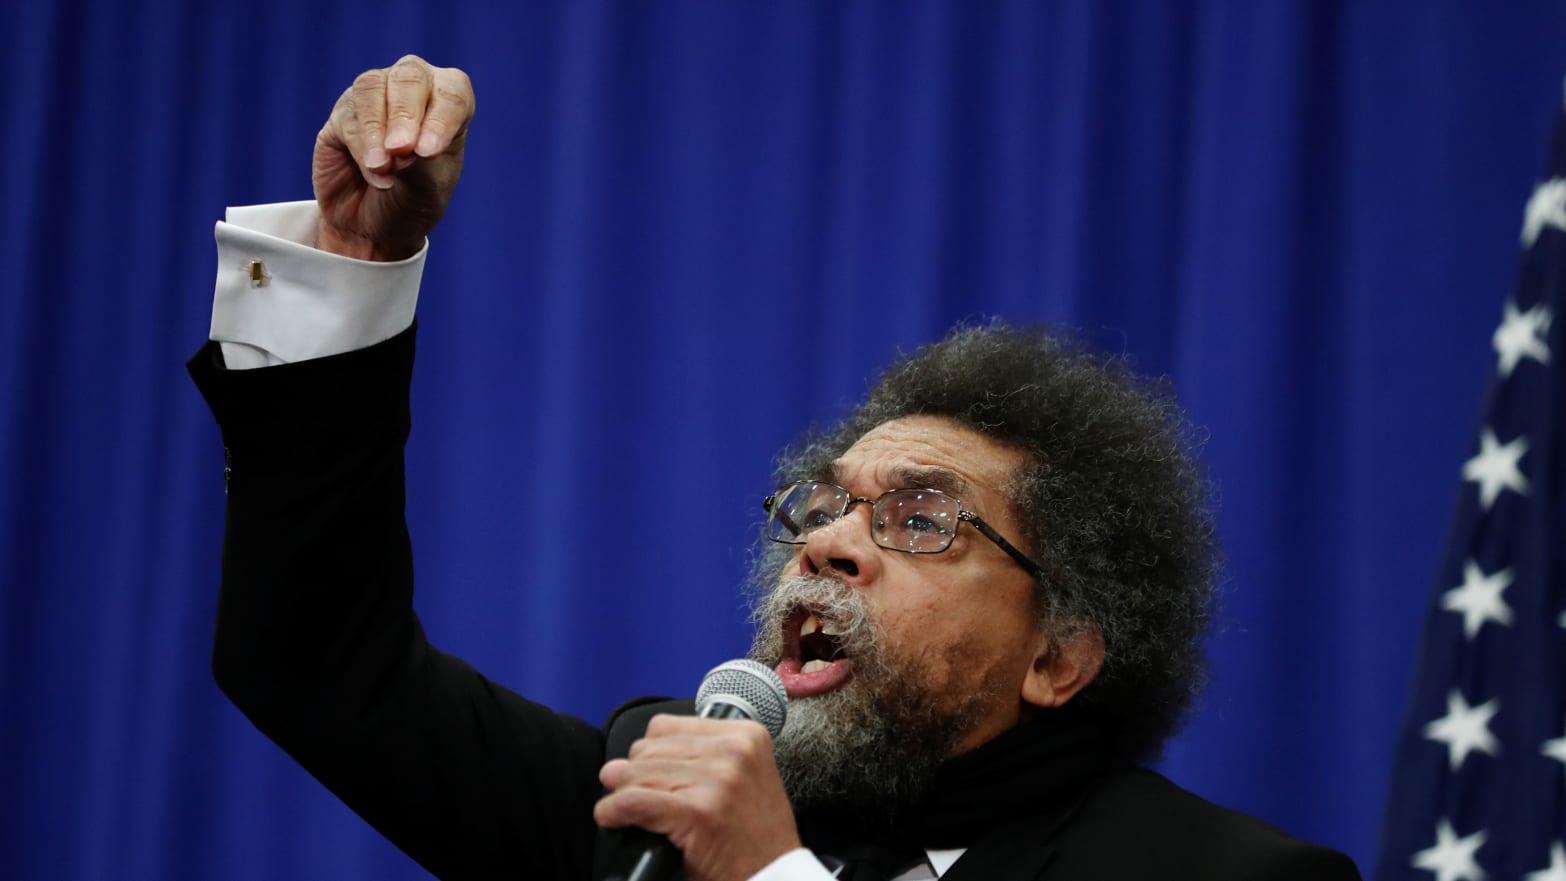 Political activist Cornel West addresses the record of U.S. Democratic presidential candidate Bernie Sanders on African-American issues during a town hall in Flint, Michigan